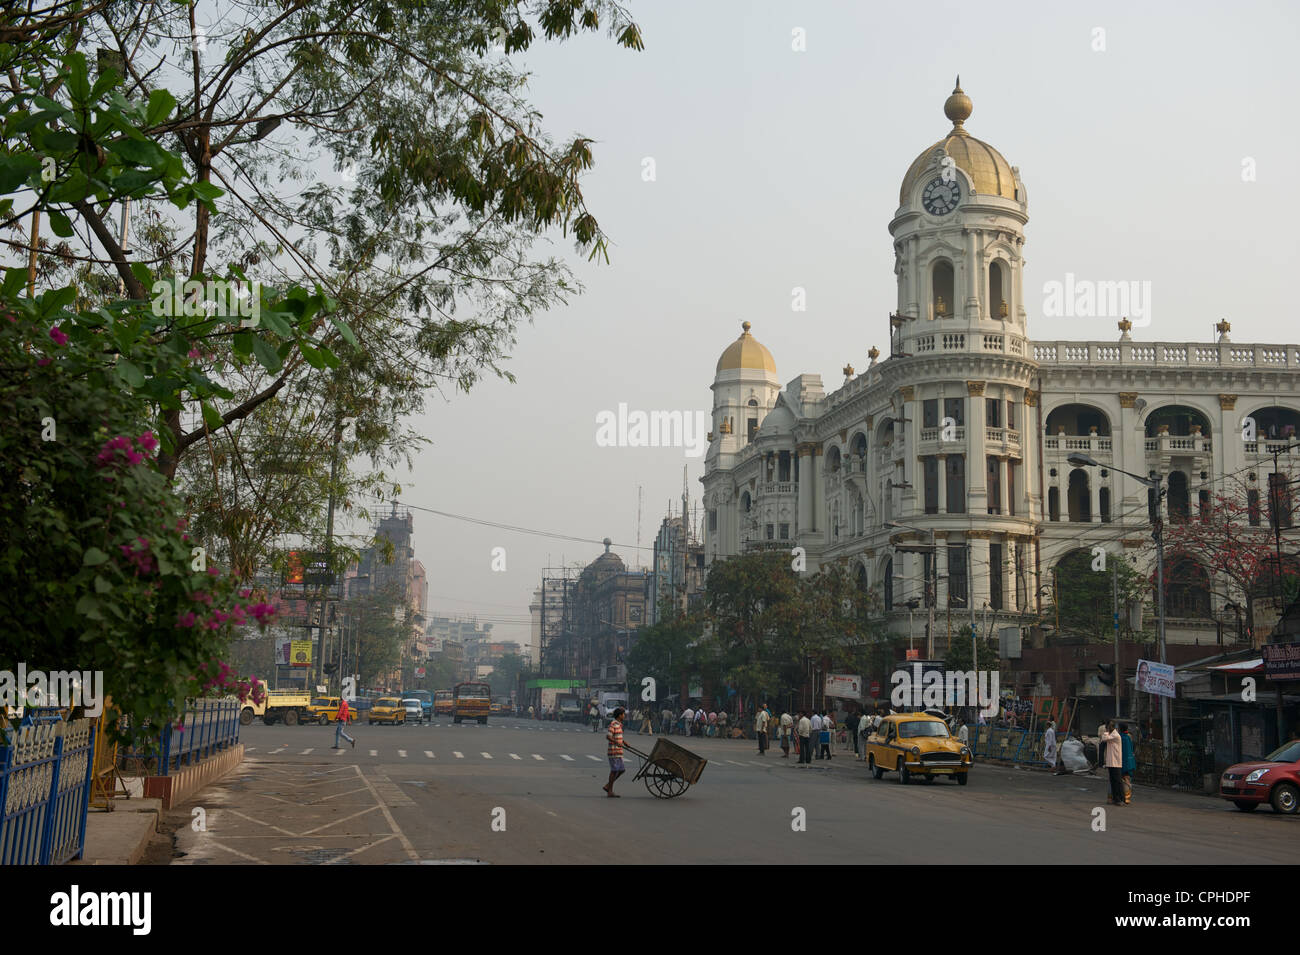 Central Calcutta, West Bengal, India Stock Photo